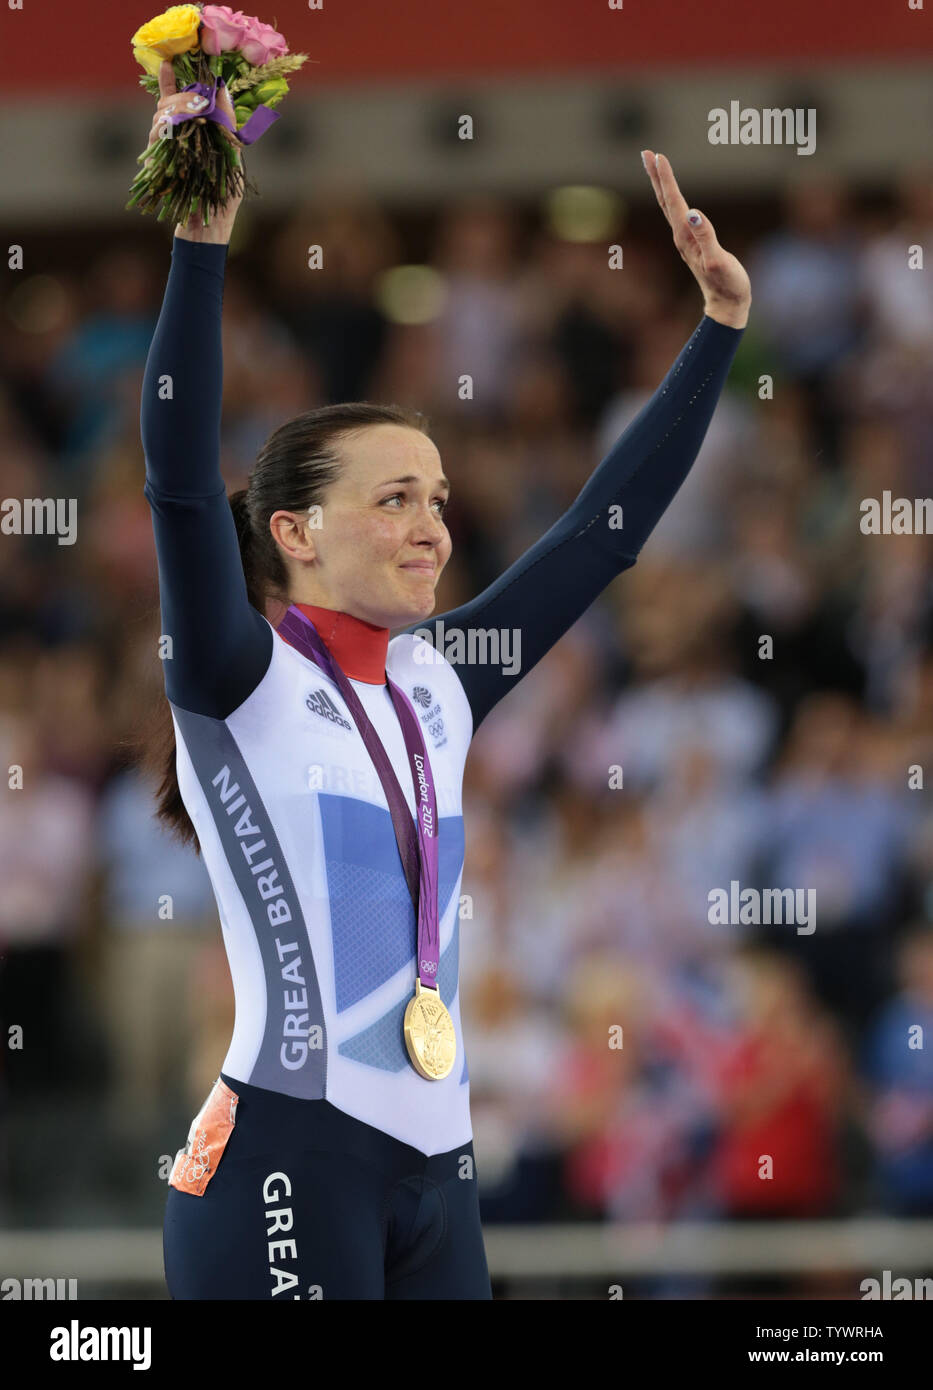 Great Britain's Victoria Pendleton celebrates her gold medal after winning the Women's Kerin cycling event at the Velodrome at the London 2012 Summer Olympics on August 03, 2012 in  London.     UPI/Hugo Philpott Stock Photo